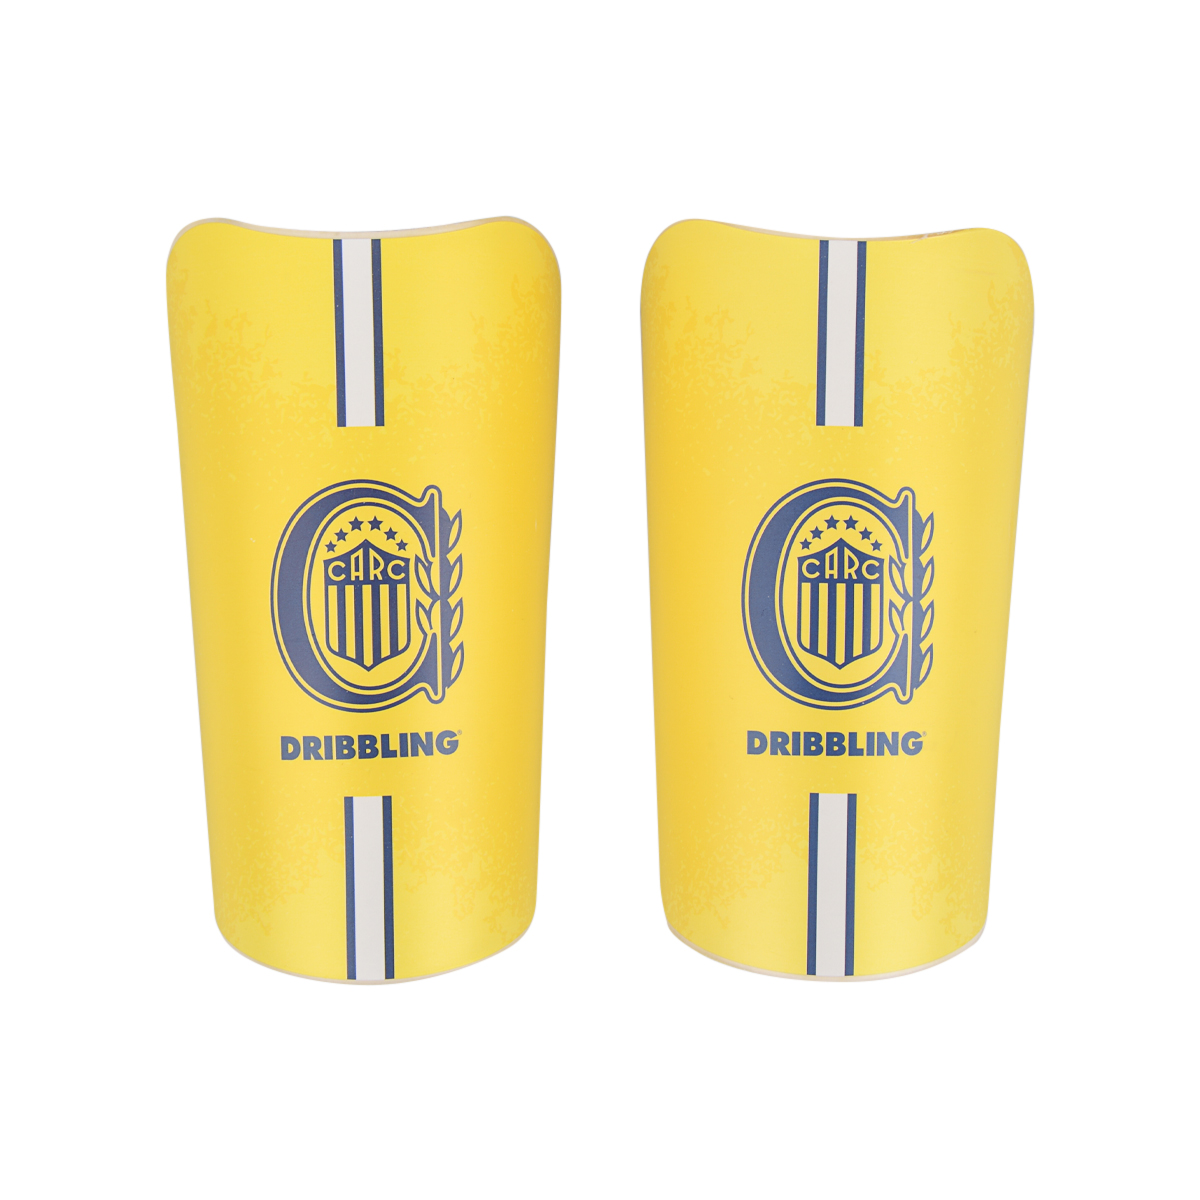 Canilleras Fútbol Rosario Central Dribbling Dioses 22 Unisex,  image number null